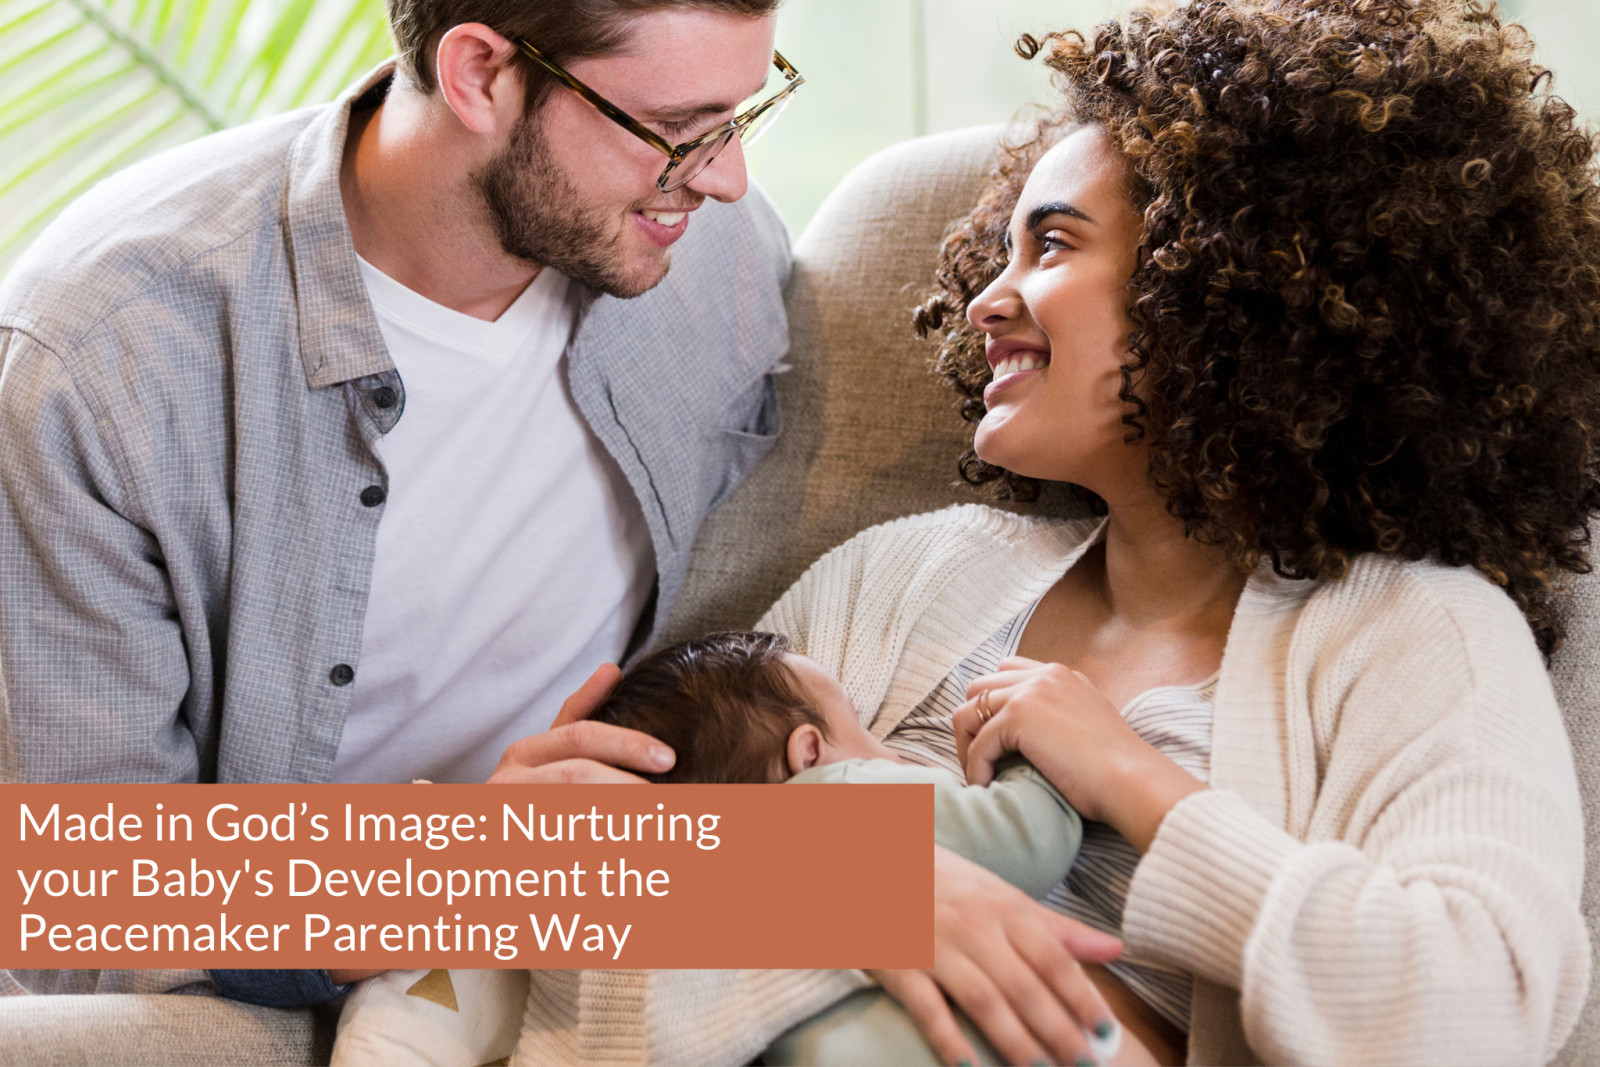 Made in God’s Image: Nurturing Your Baby's Development the Peacemaker Parenting Way